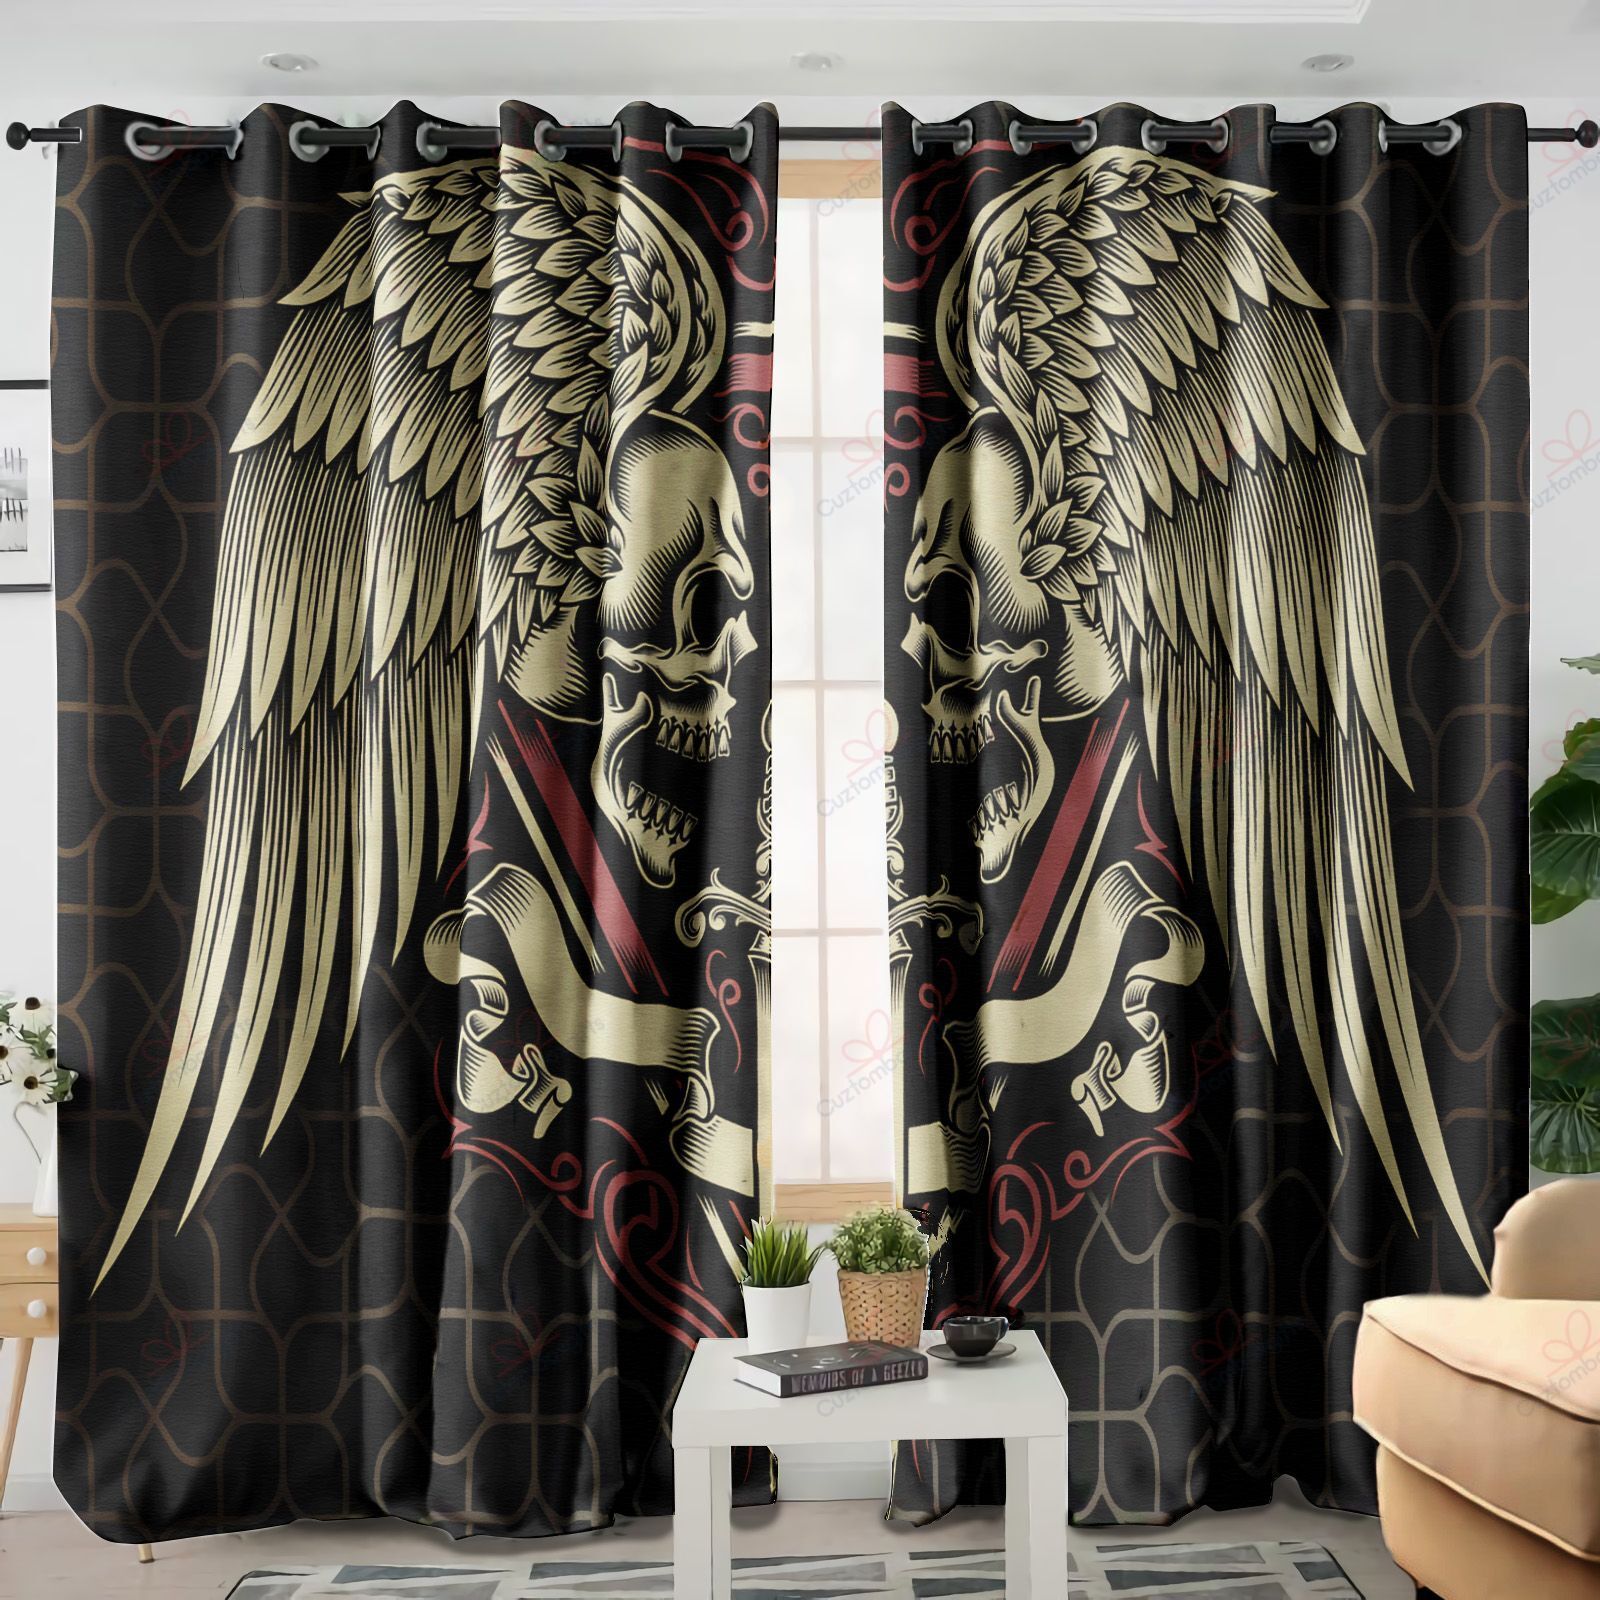 Skull And Sword Printed Window Curtain Home Decor